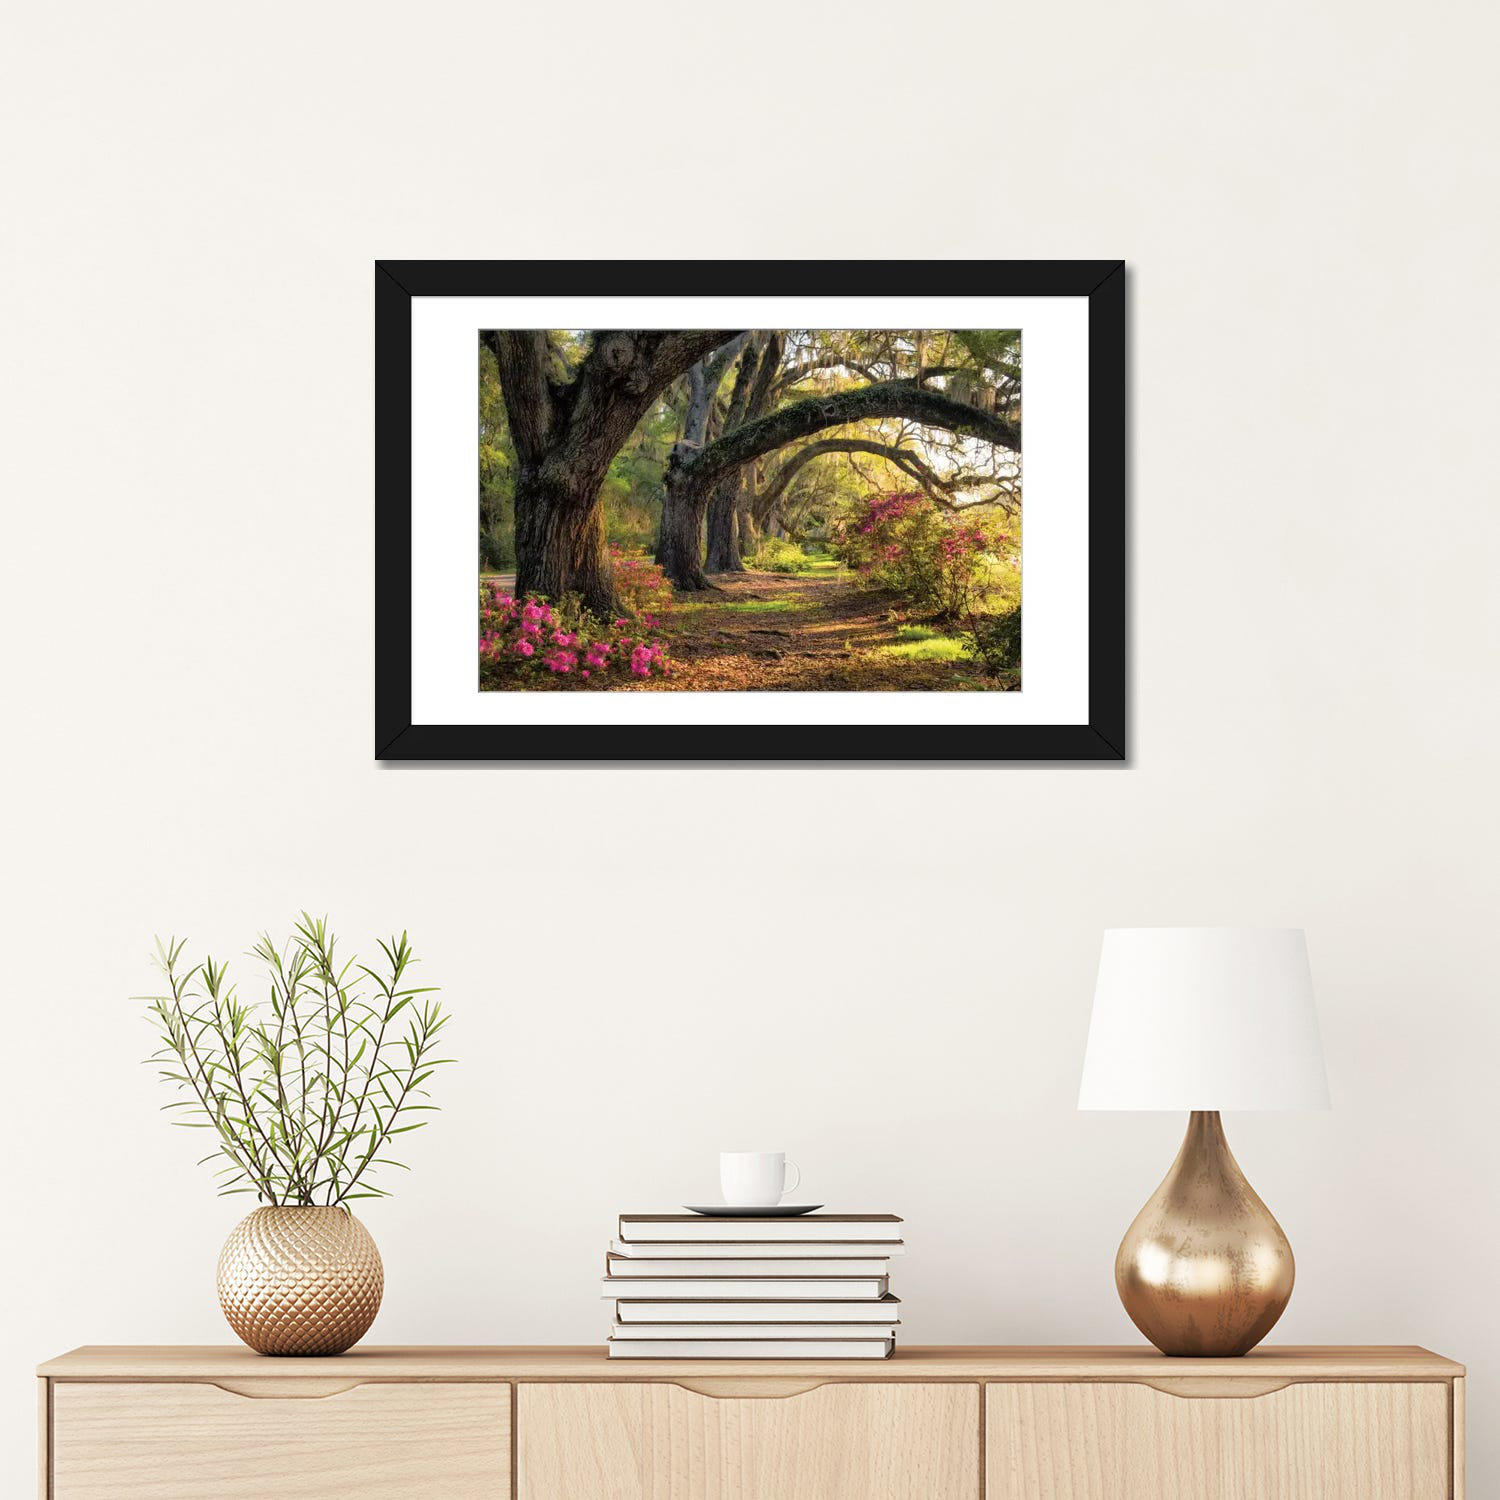 Bless international Under The Live Oaks I On Canvas by Danny Head Print ...